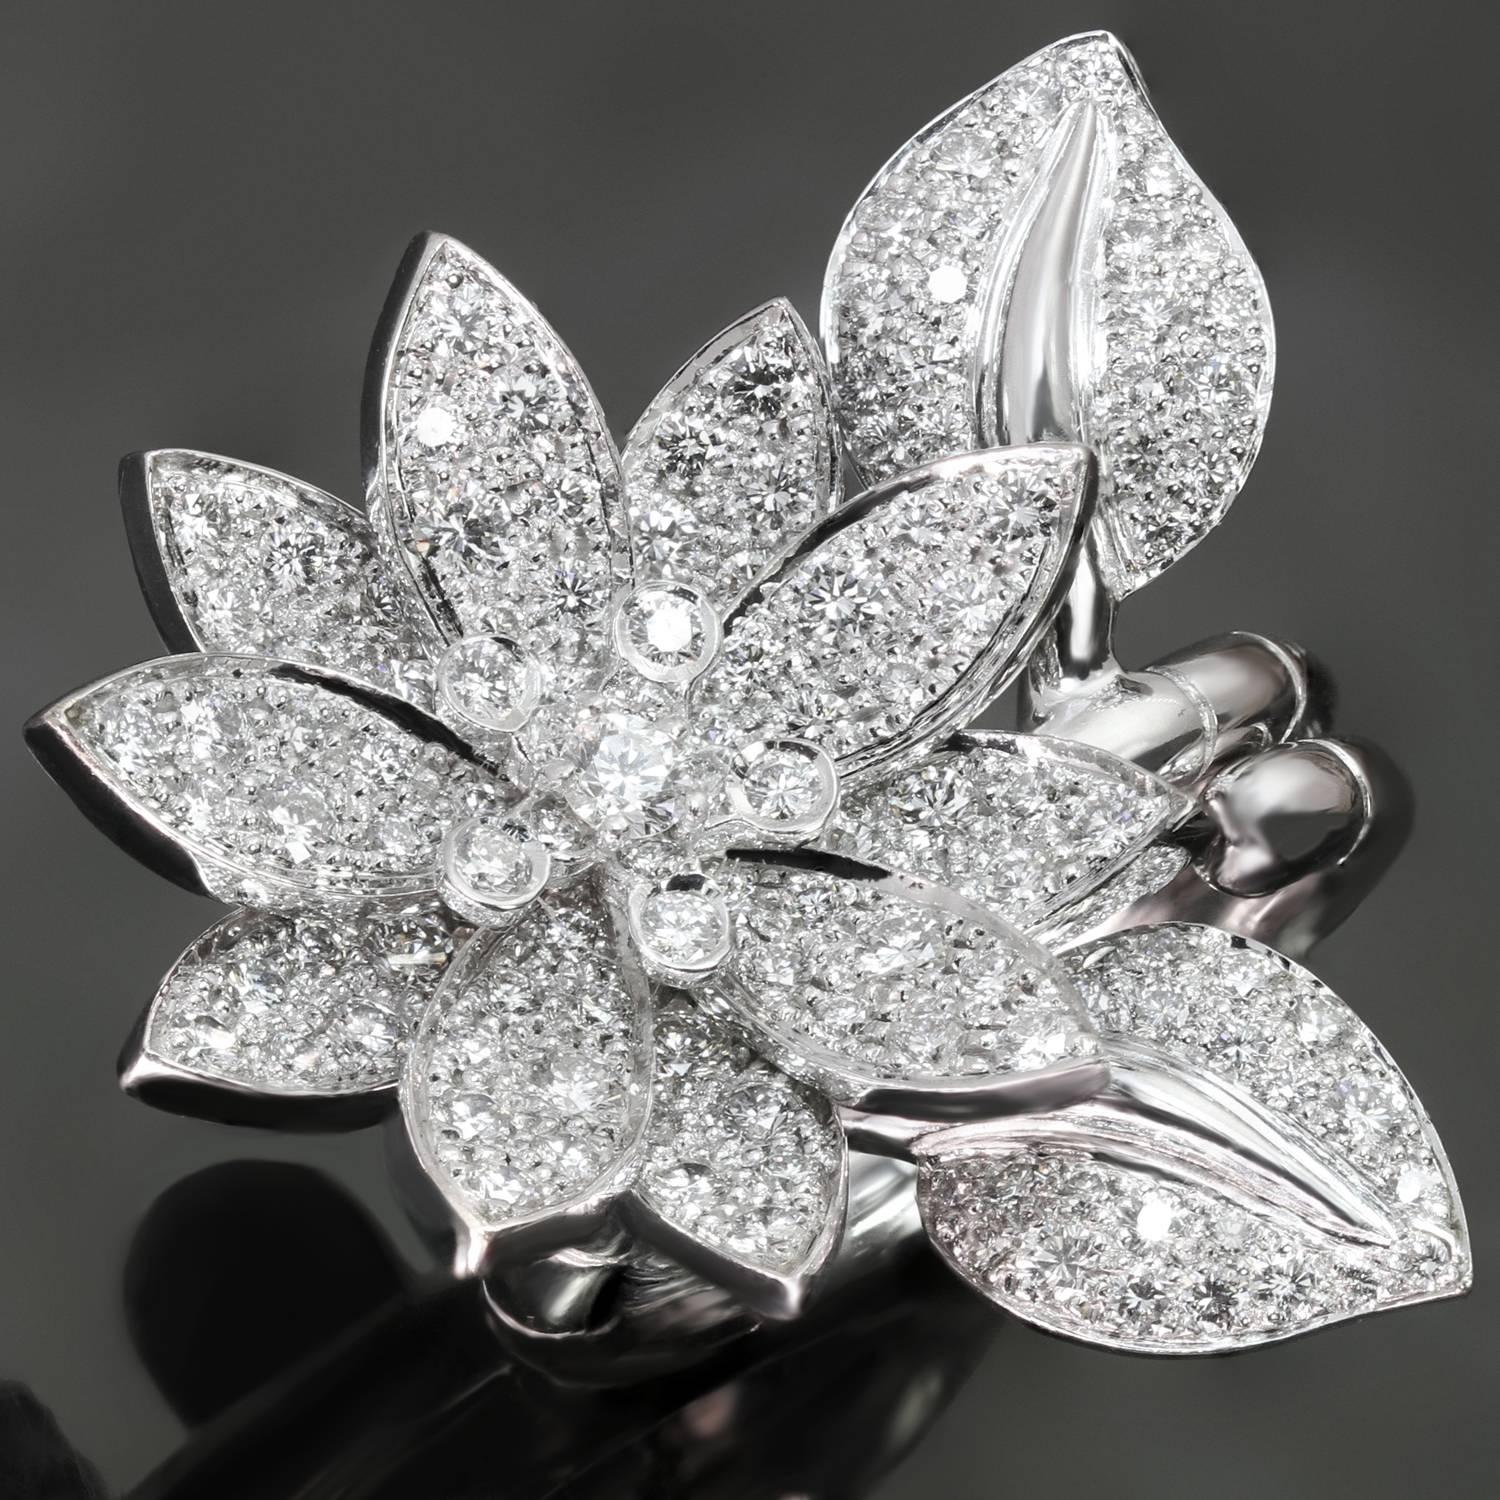 This fabulous Van Cleef & Arpels ring is crafted in 18k white gold and features a gorgeous lotus flower design set with 127 brilliant-cut round diamonds of an estimated 2.13 carats. This between-the-finger ring can be worn on either one or two